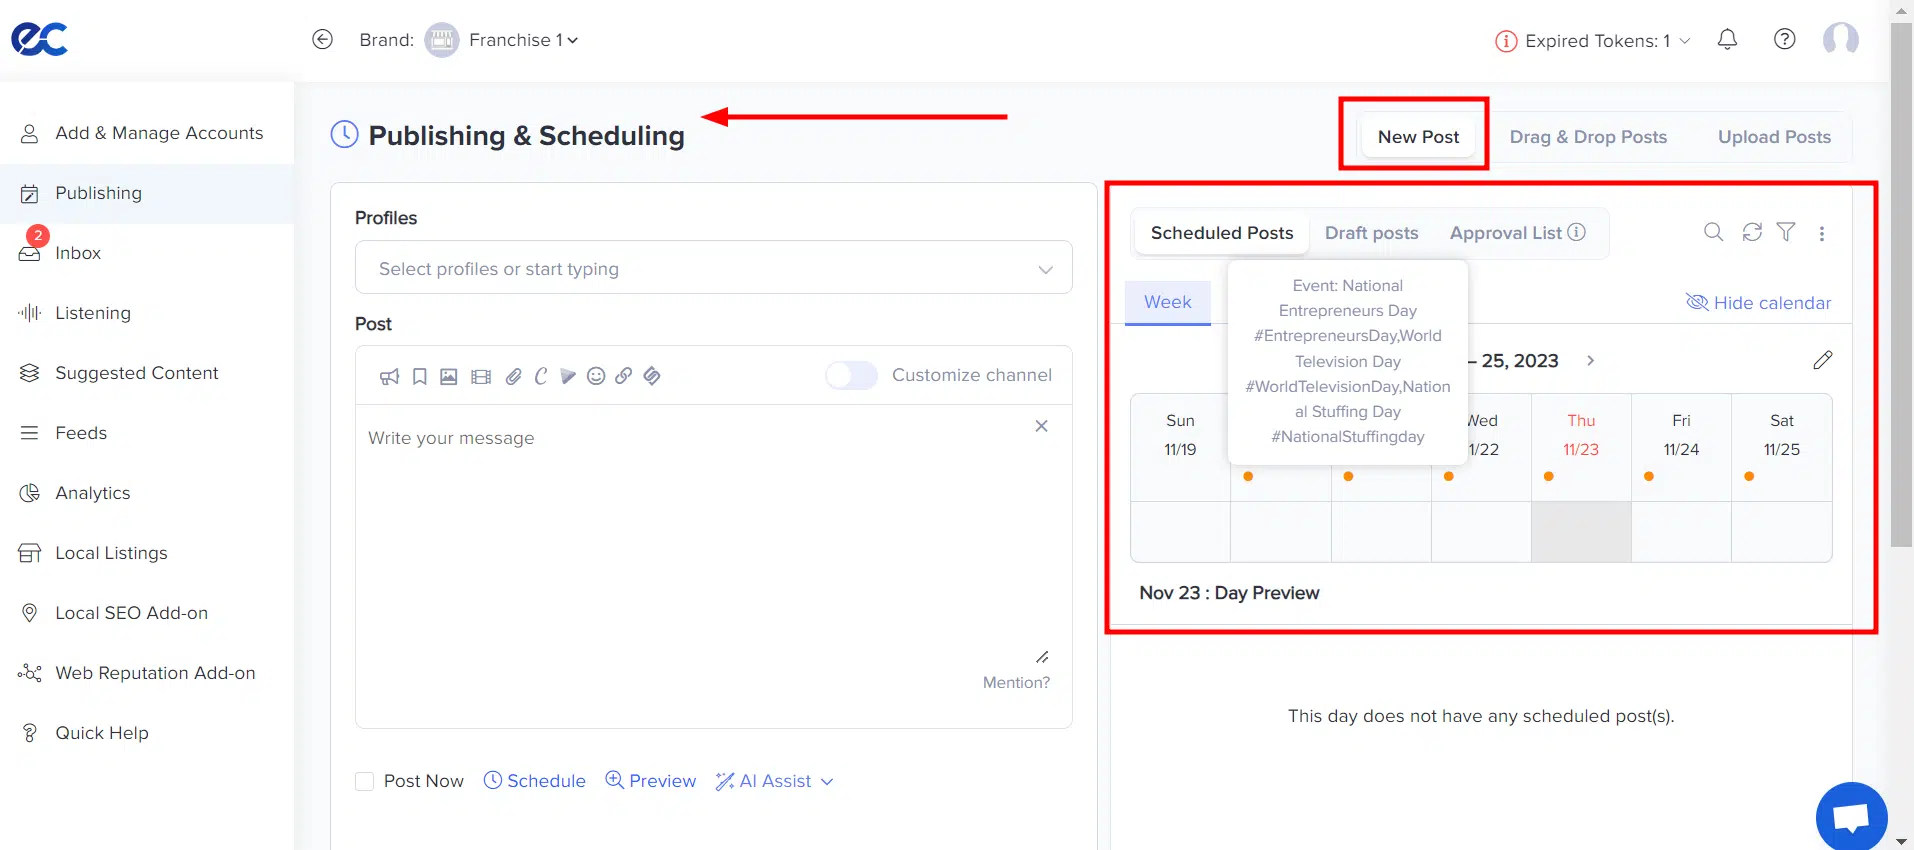 Content Creation And Post Scheduling